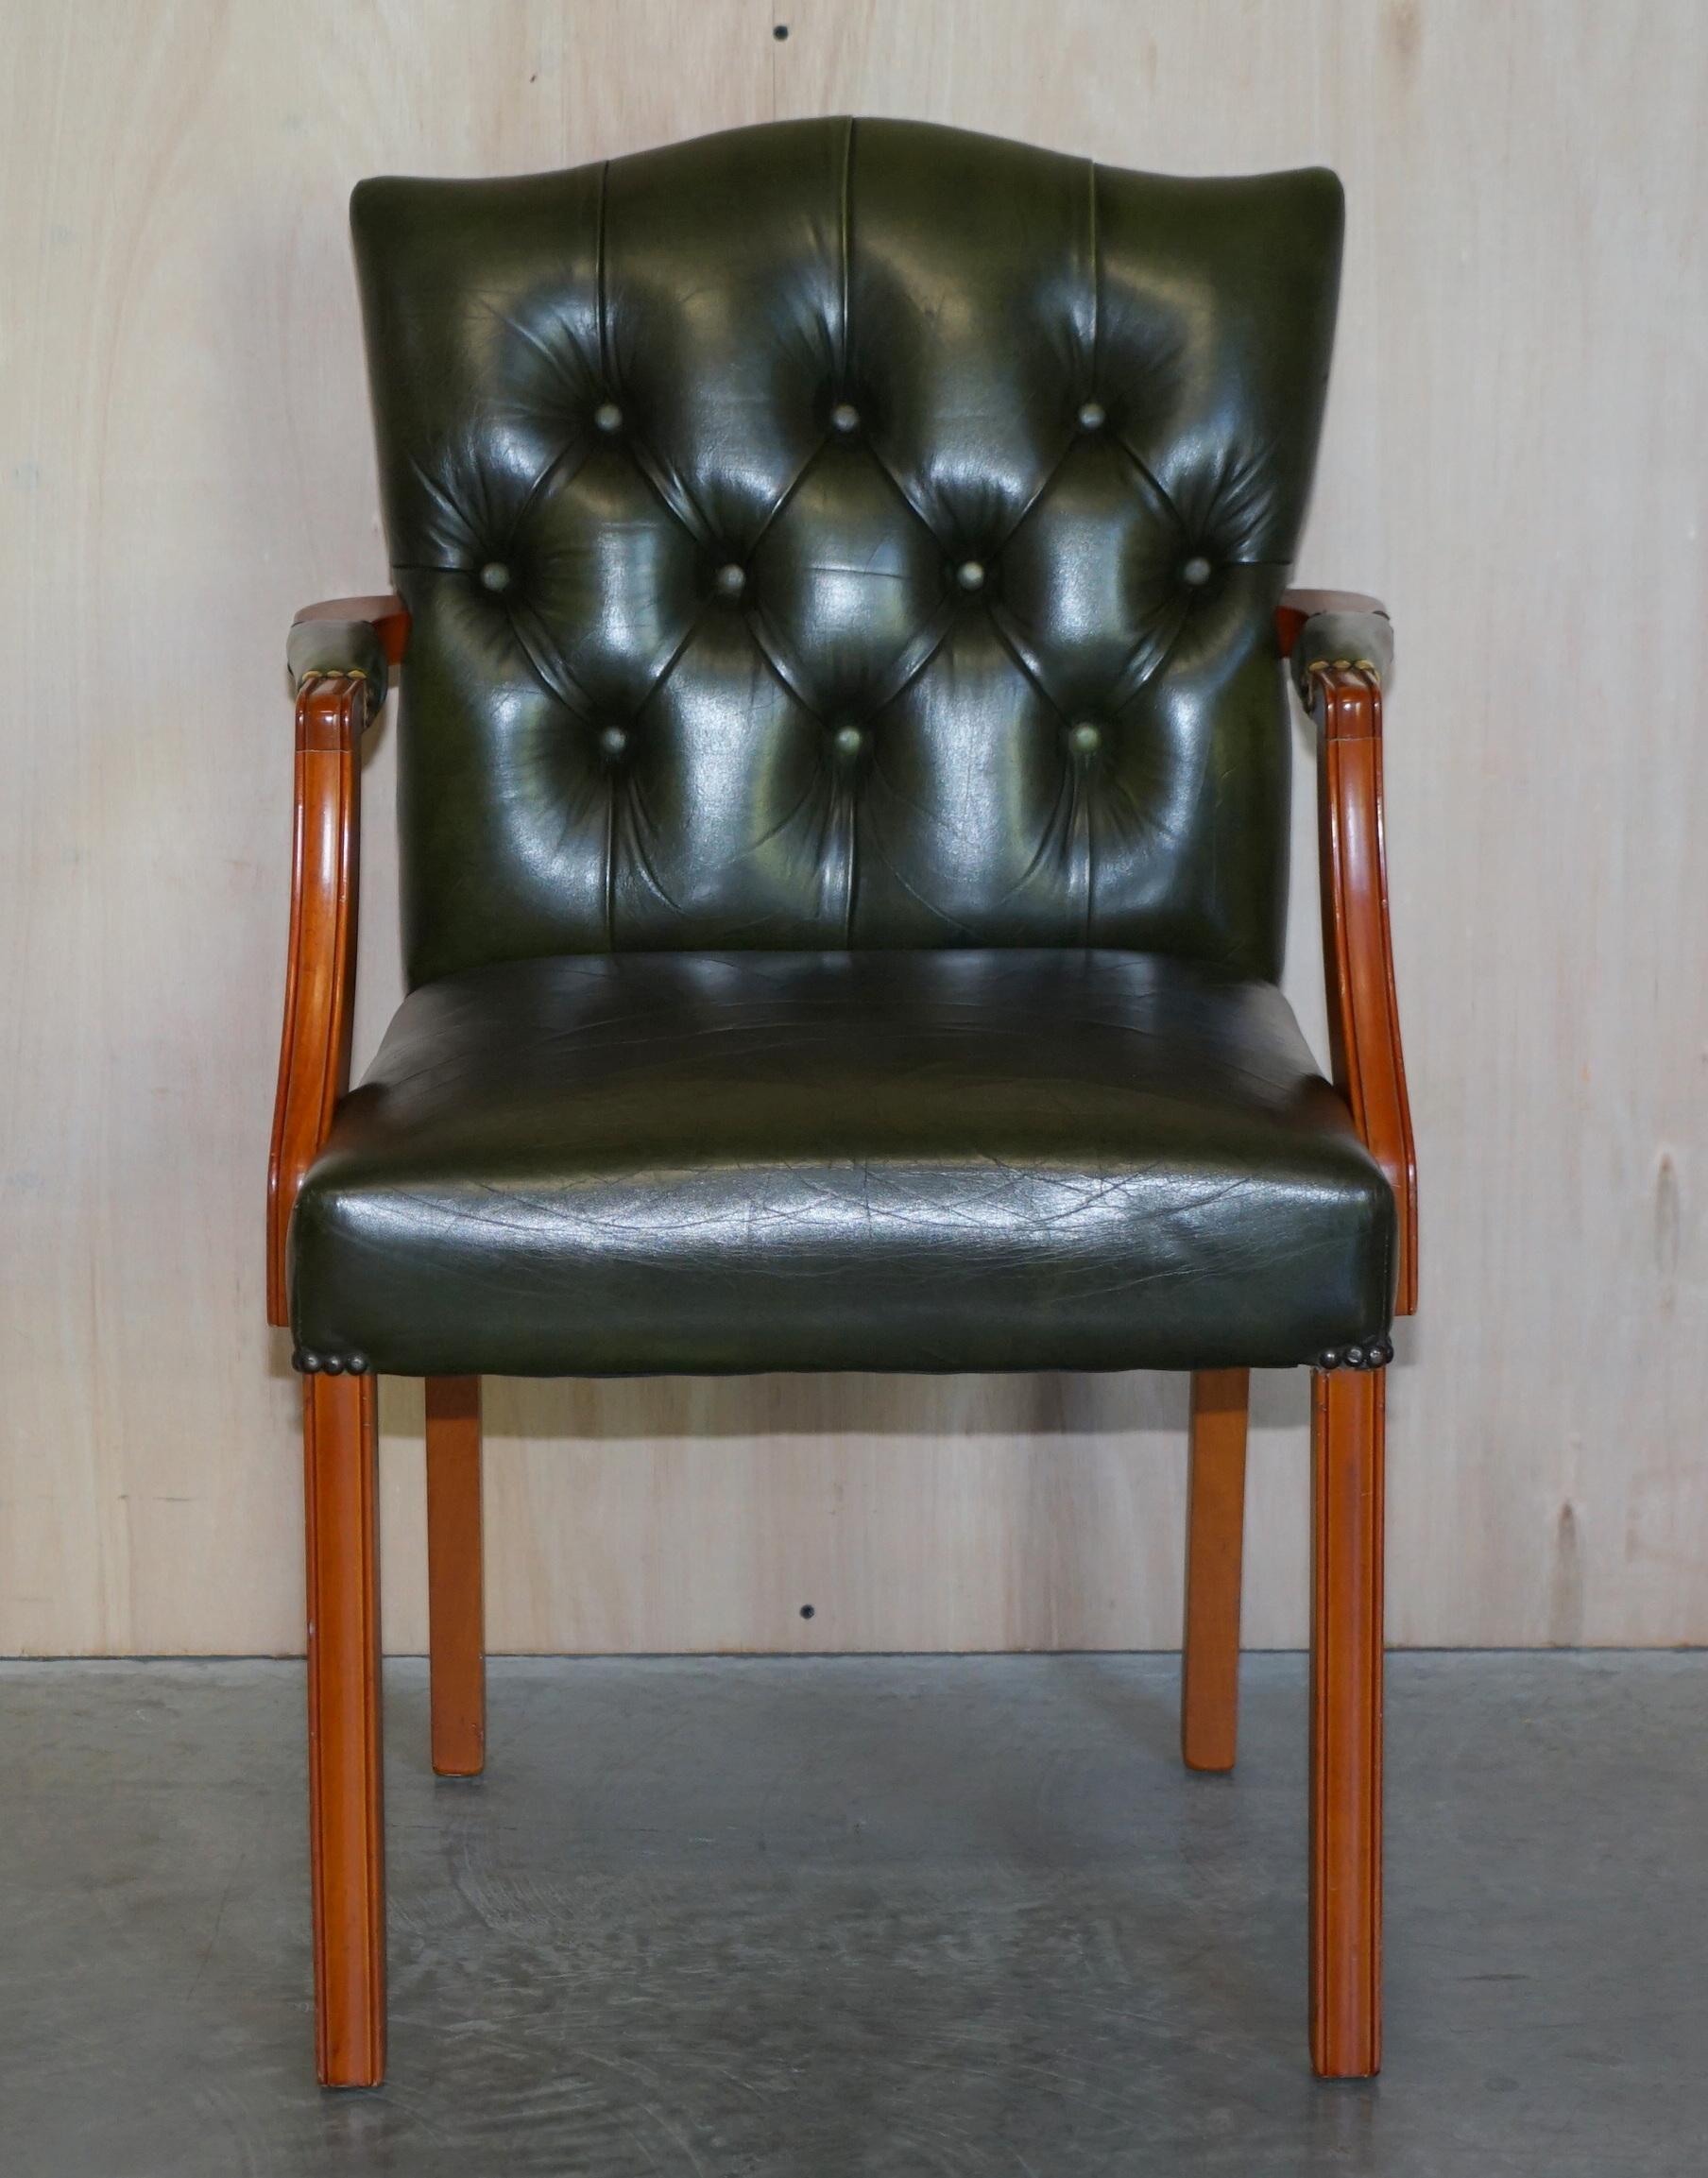 We are delighted to offer for sale this lovely vintage Regency green leather, Chesterfield tufted office chair

A good looking and well made office chair, ideally suited to go with a green leather topped twin pedestal partner desk,

The